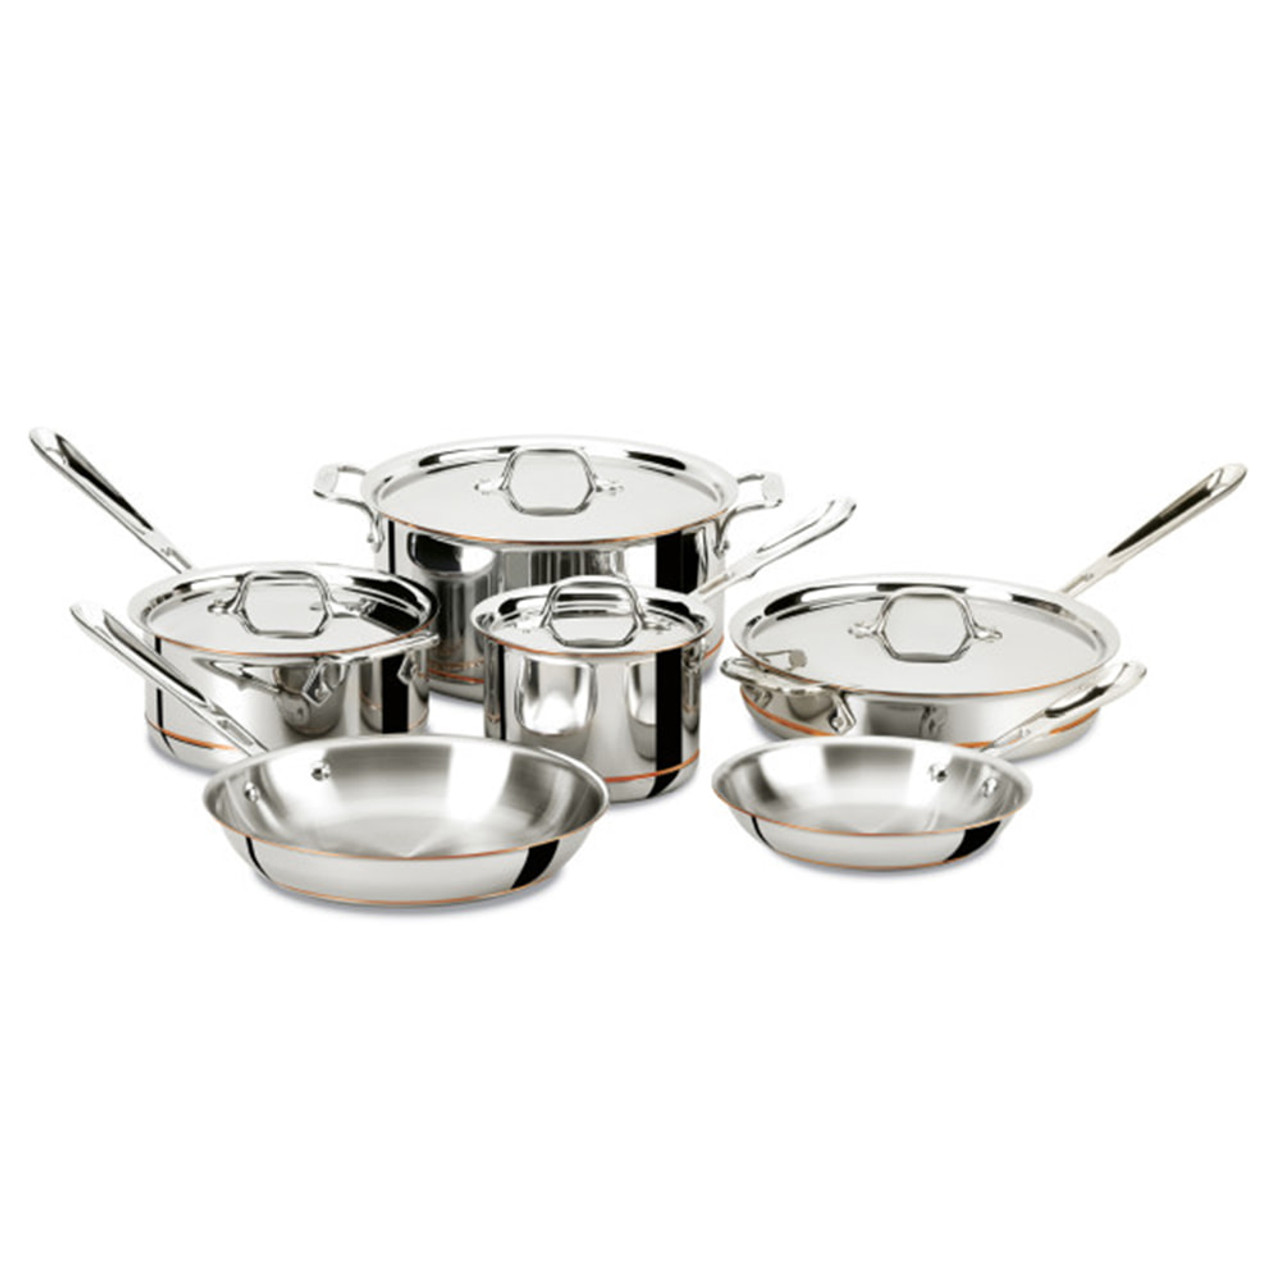 Buy once cry once. All Clad copper core set with 2 non-stick All